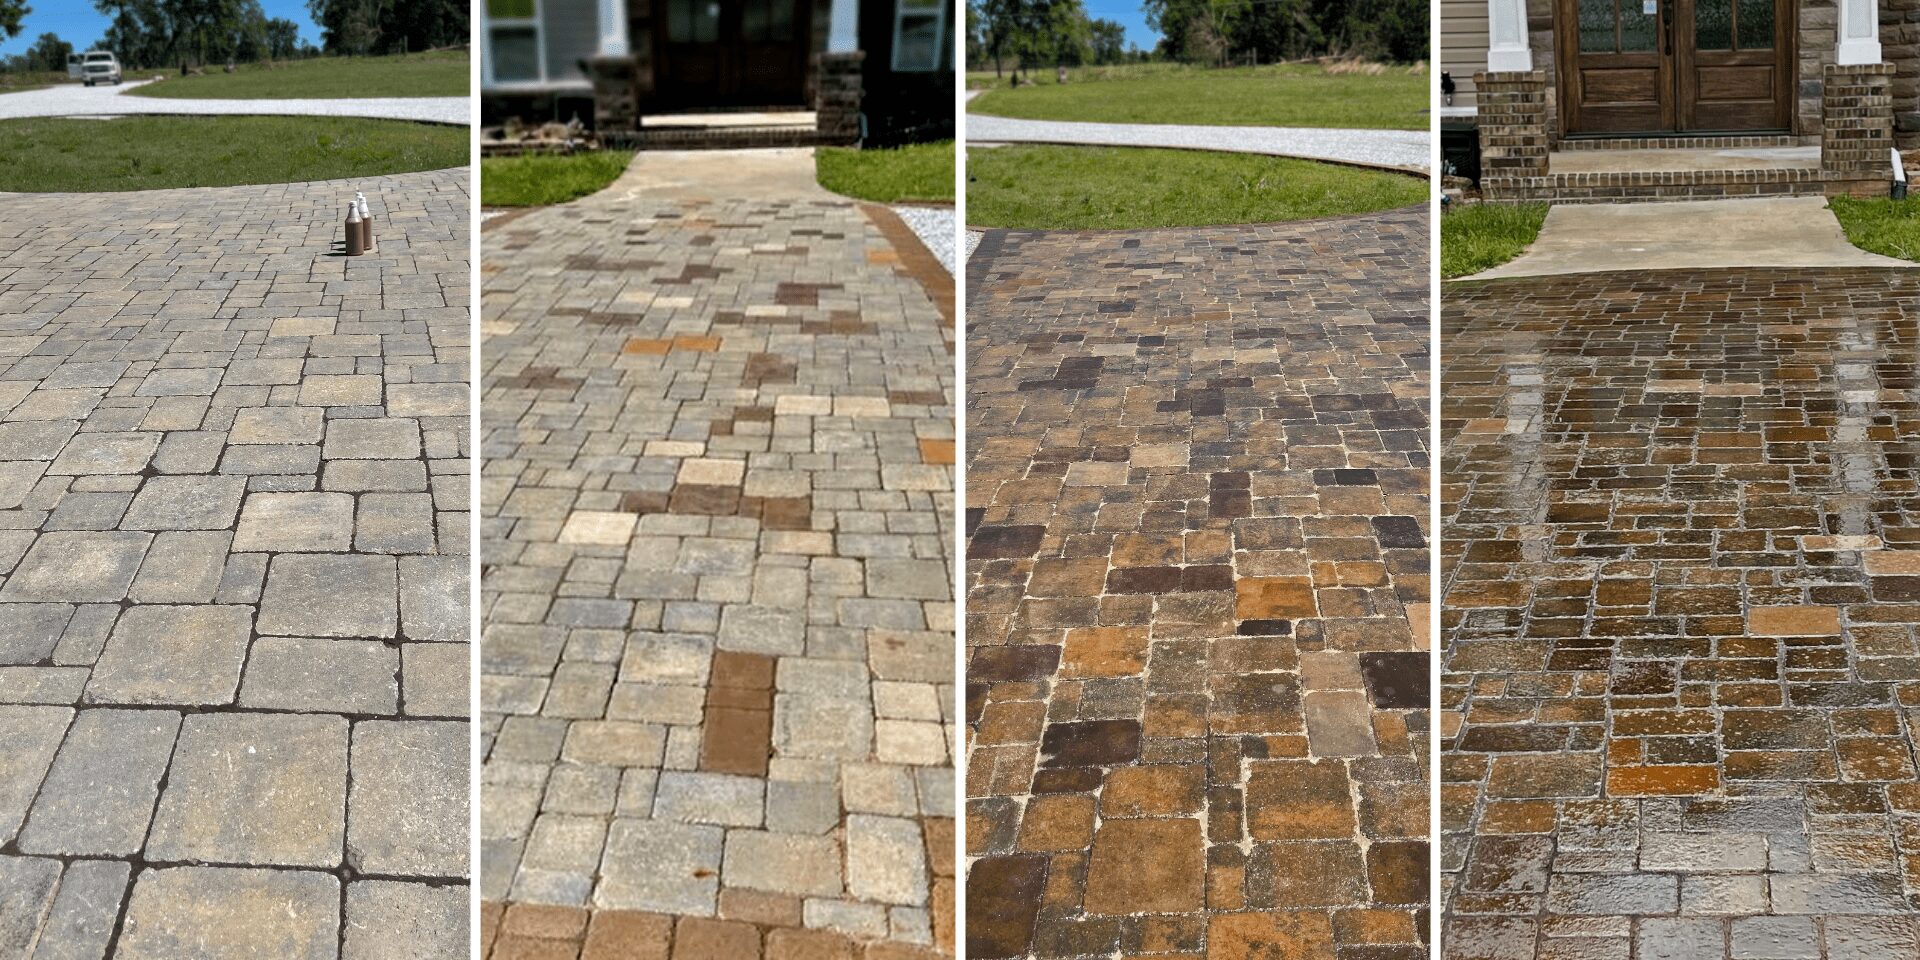 staining concrete pavers: before staining, applying stain, finished stained pavers, and sealed